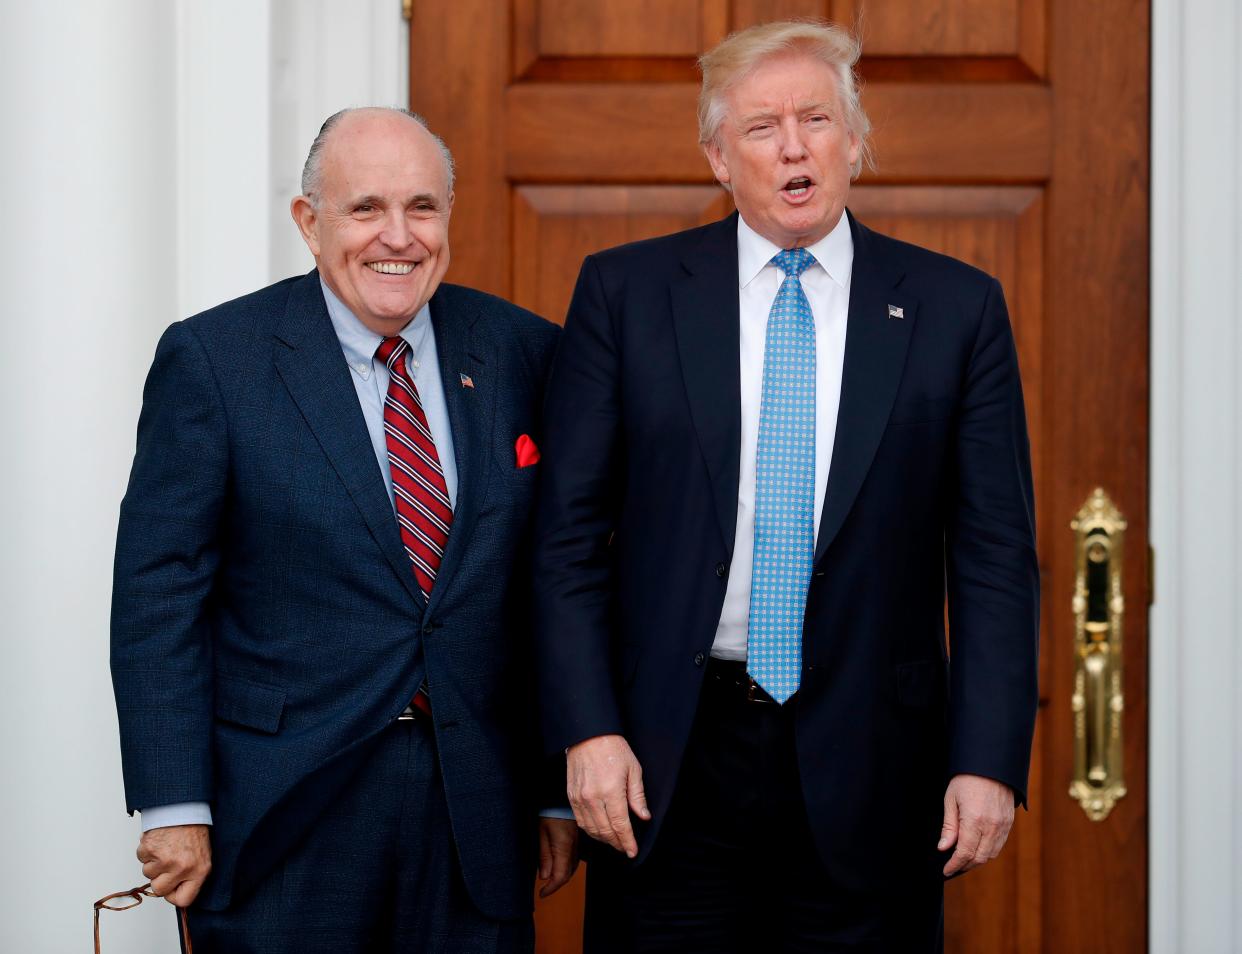 In this Nov. 20, 2016 photo, then-President-elect Donald Trump, right, and former New York Mayor Rudy Giuliani pose for photographs as Giuliani arrives at the Trump National Golf Club Bedminster clubhouse in Bedminster, N.J.